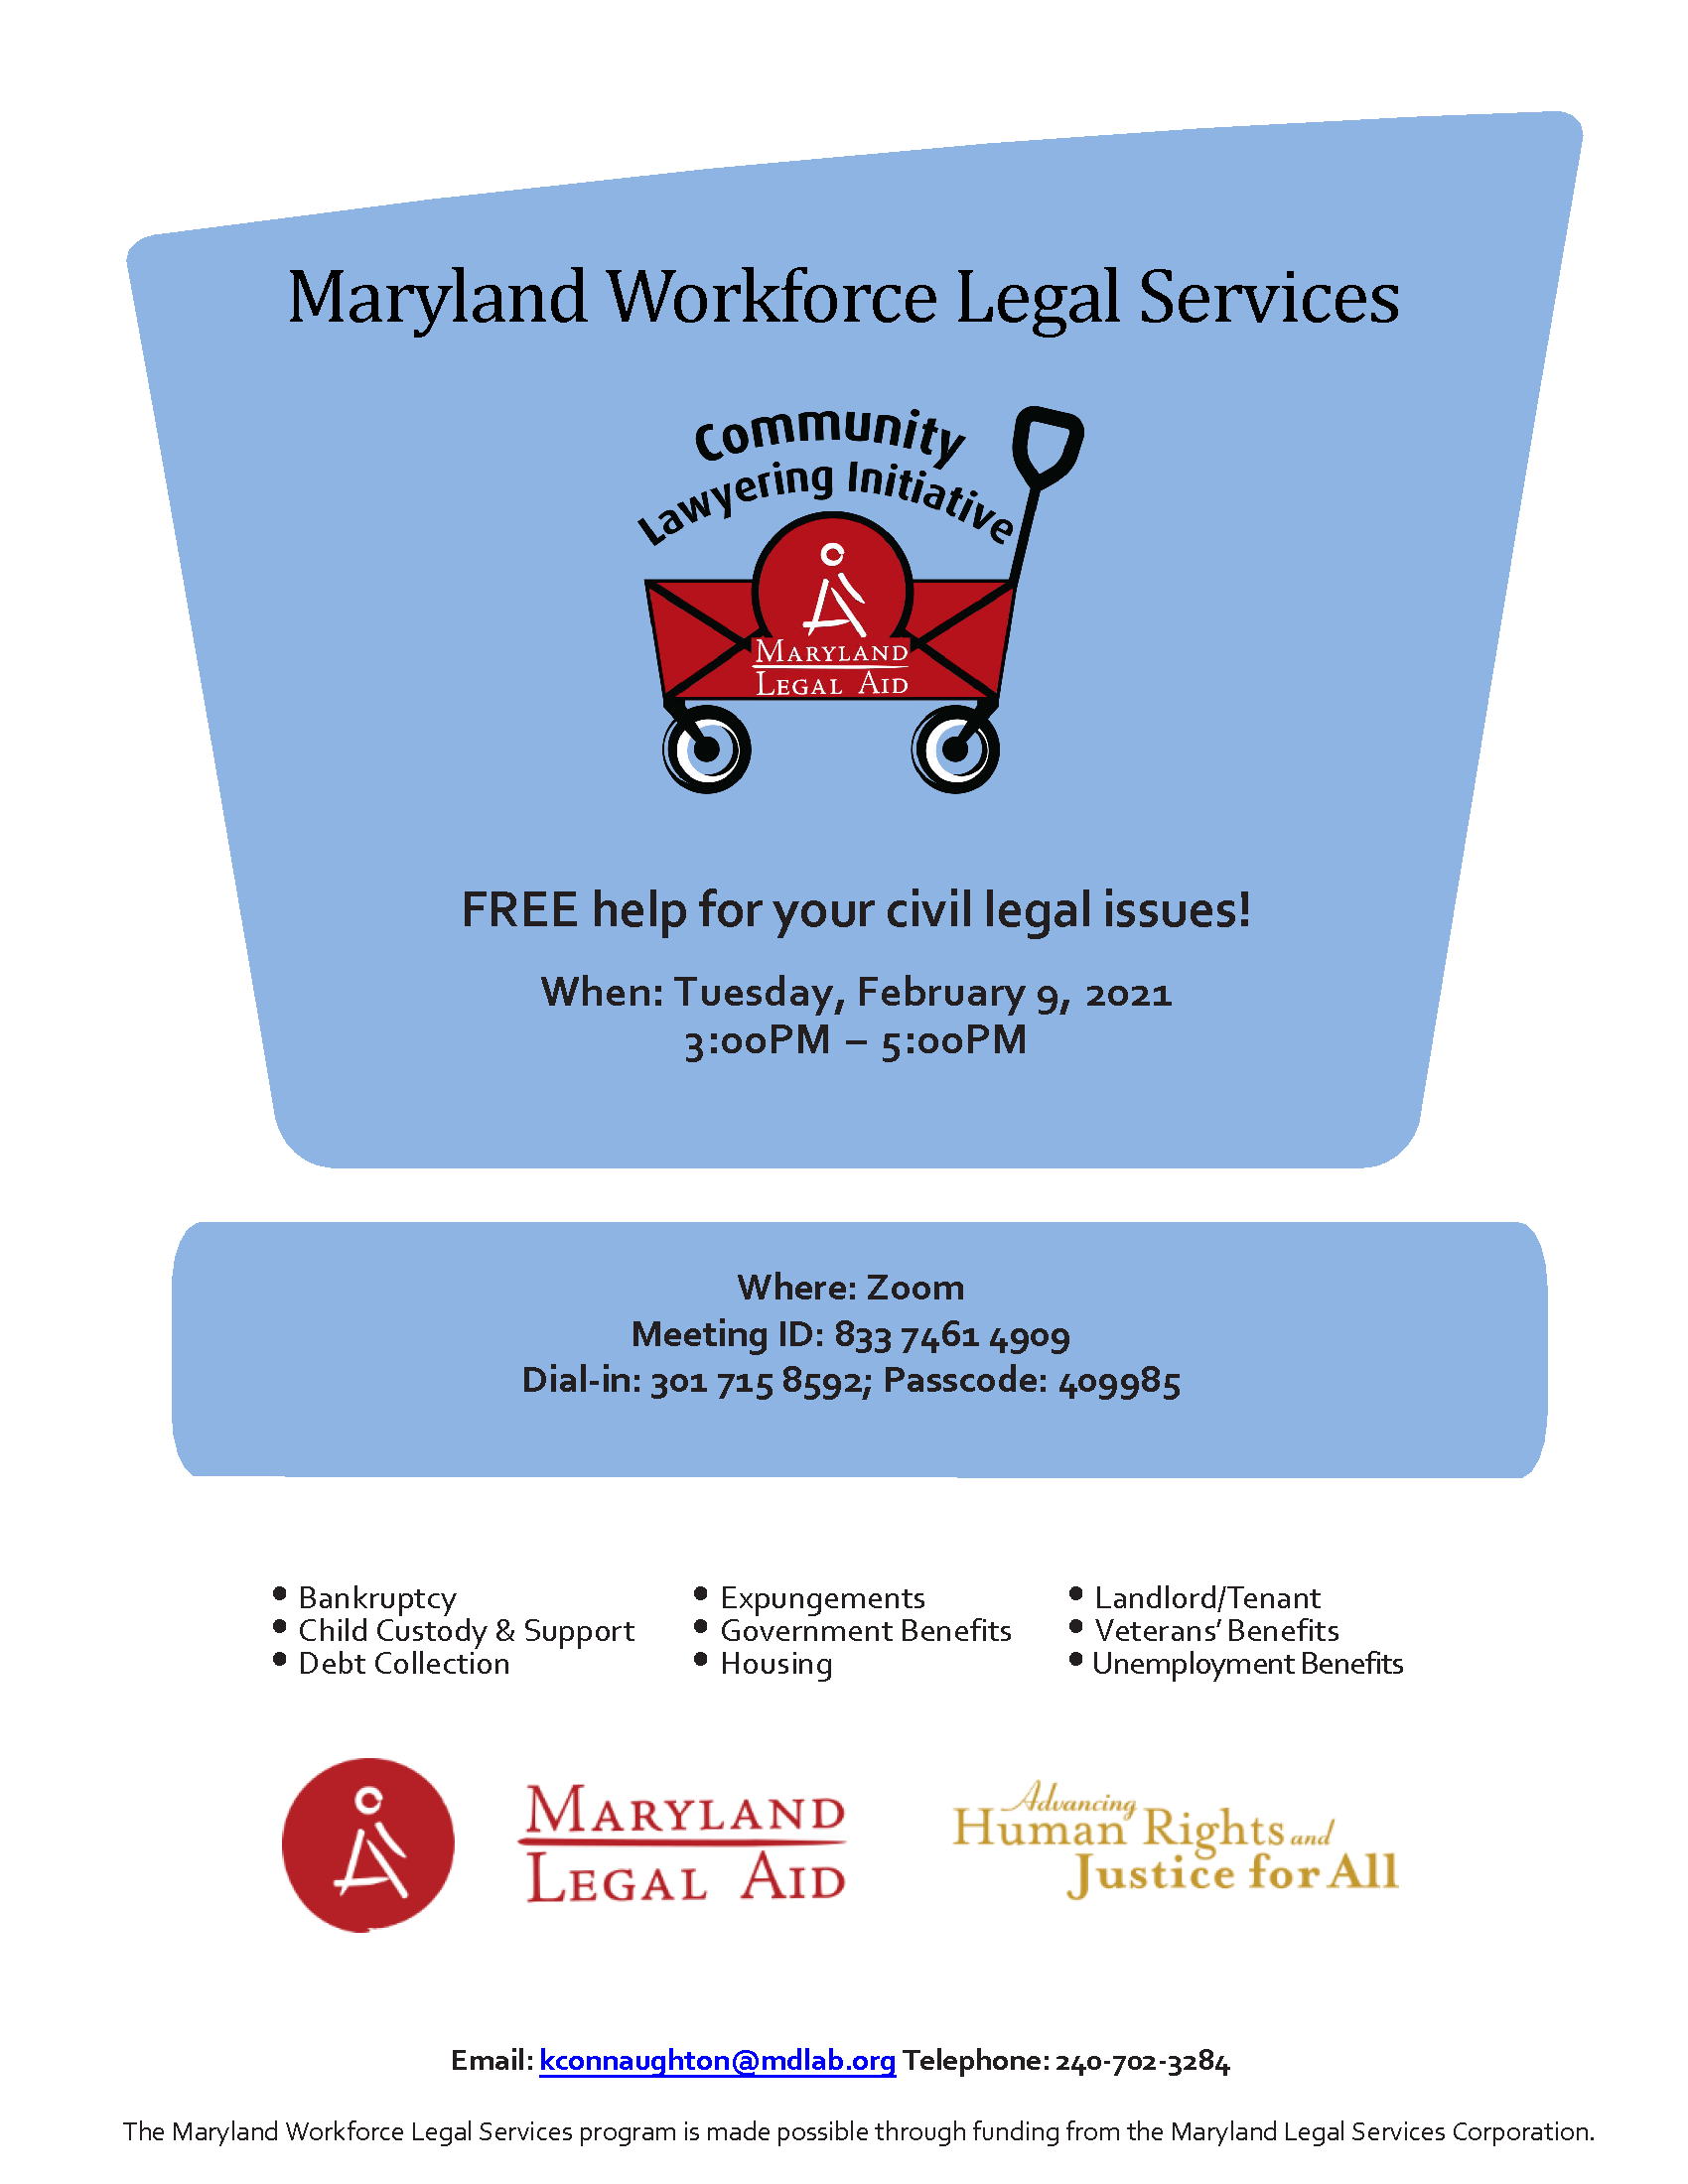 Maryland Legal Services (Lawyer in the Library) Virtual Clinic